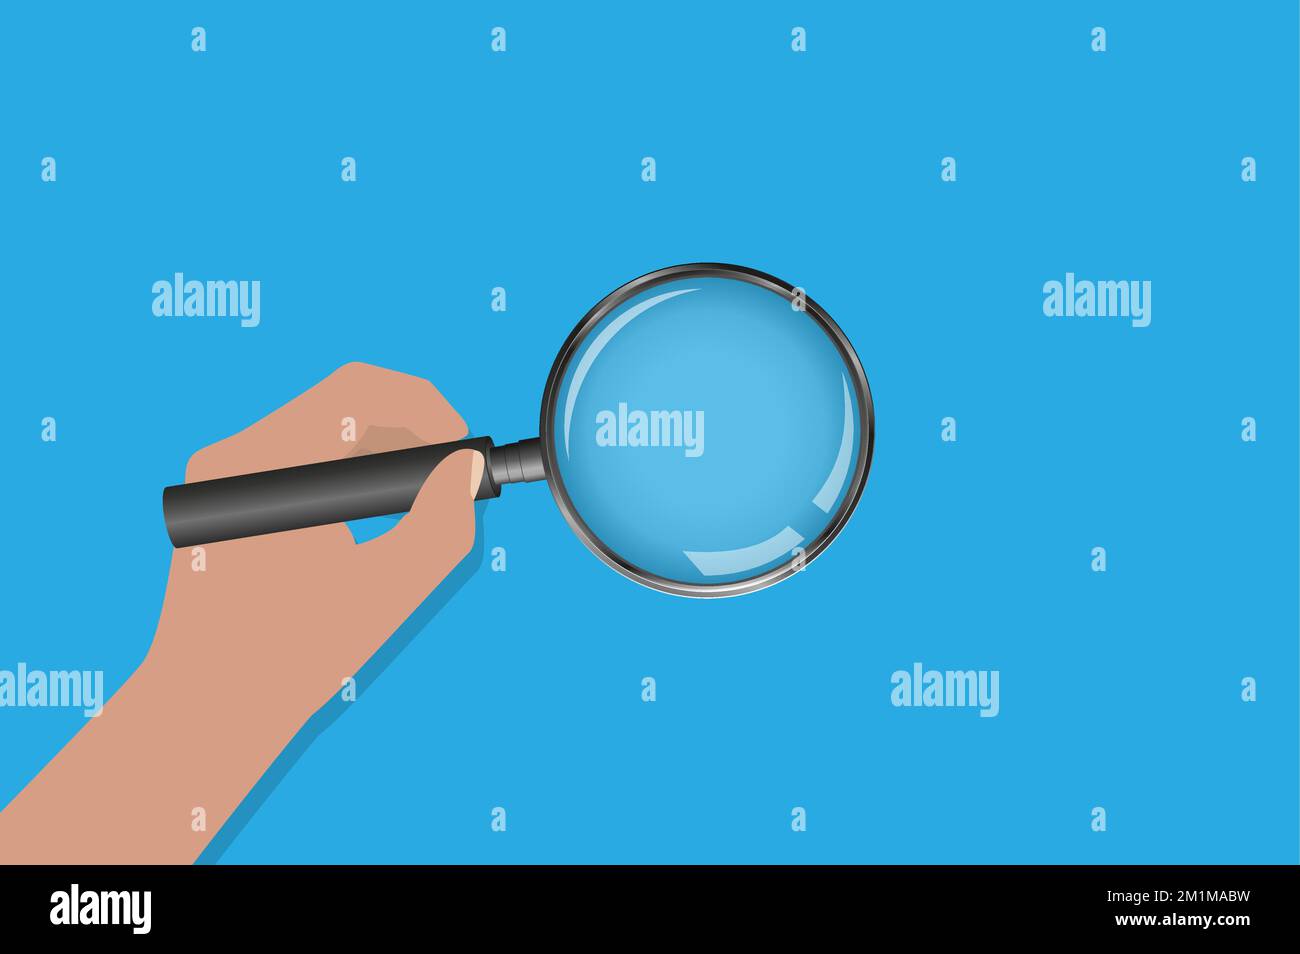 hand holding magnifying glass against blue background, research and examination concept vector illustration Stock Vector